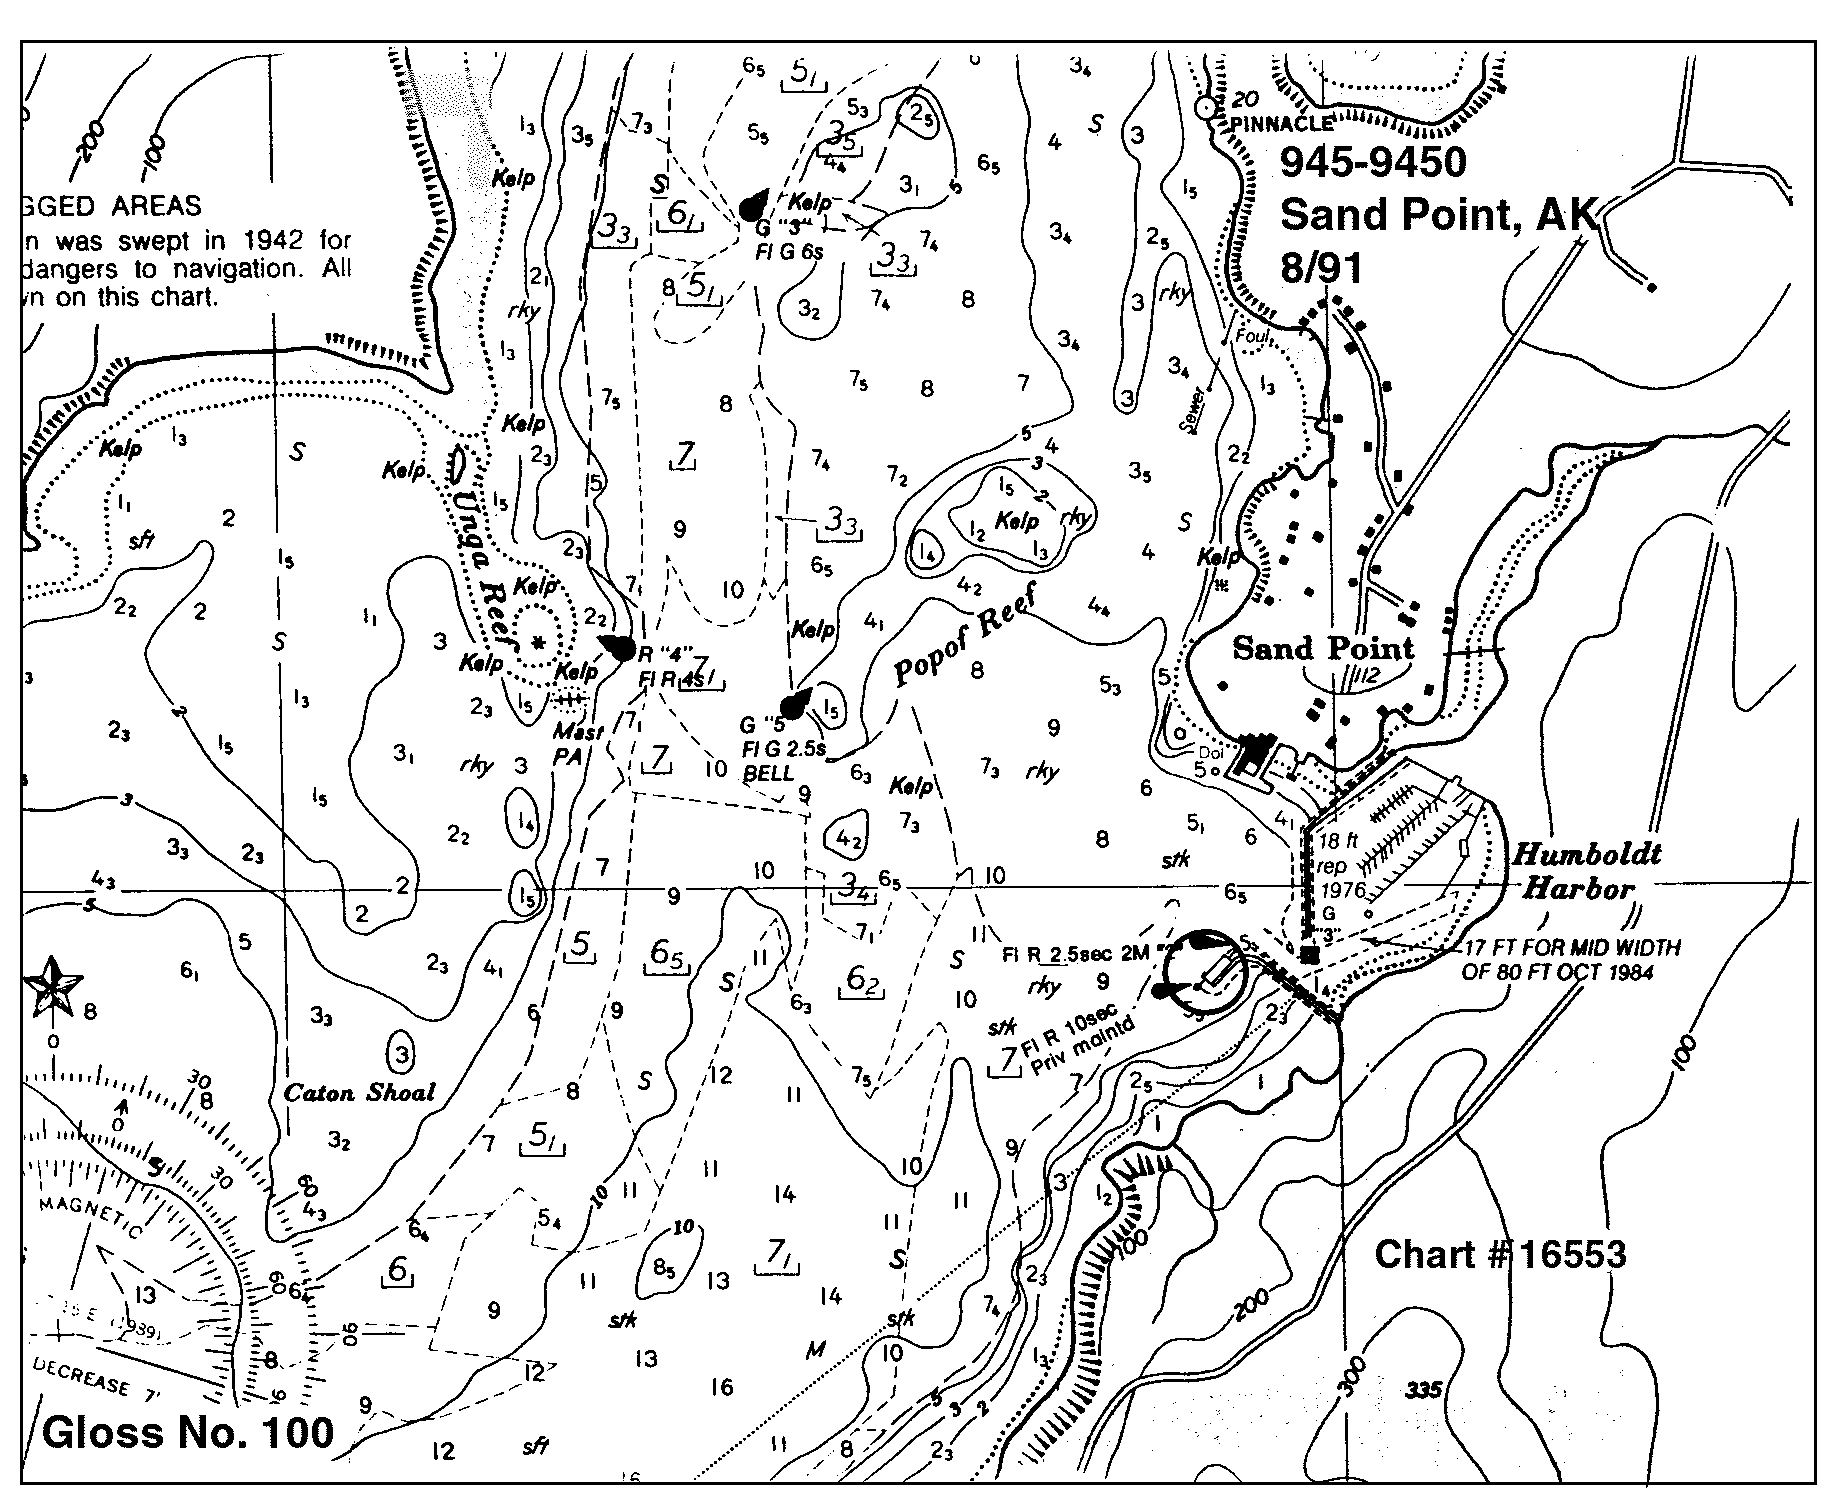 Location map for Sand Point, AK, U.S.A.